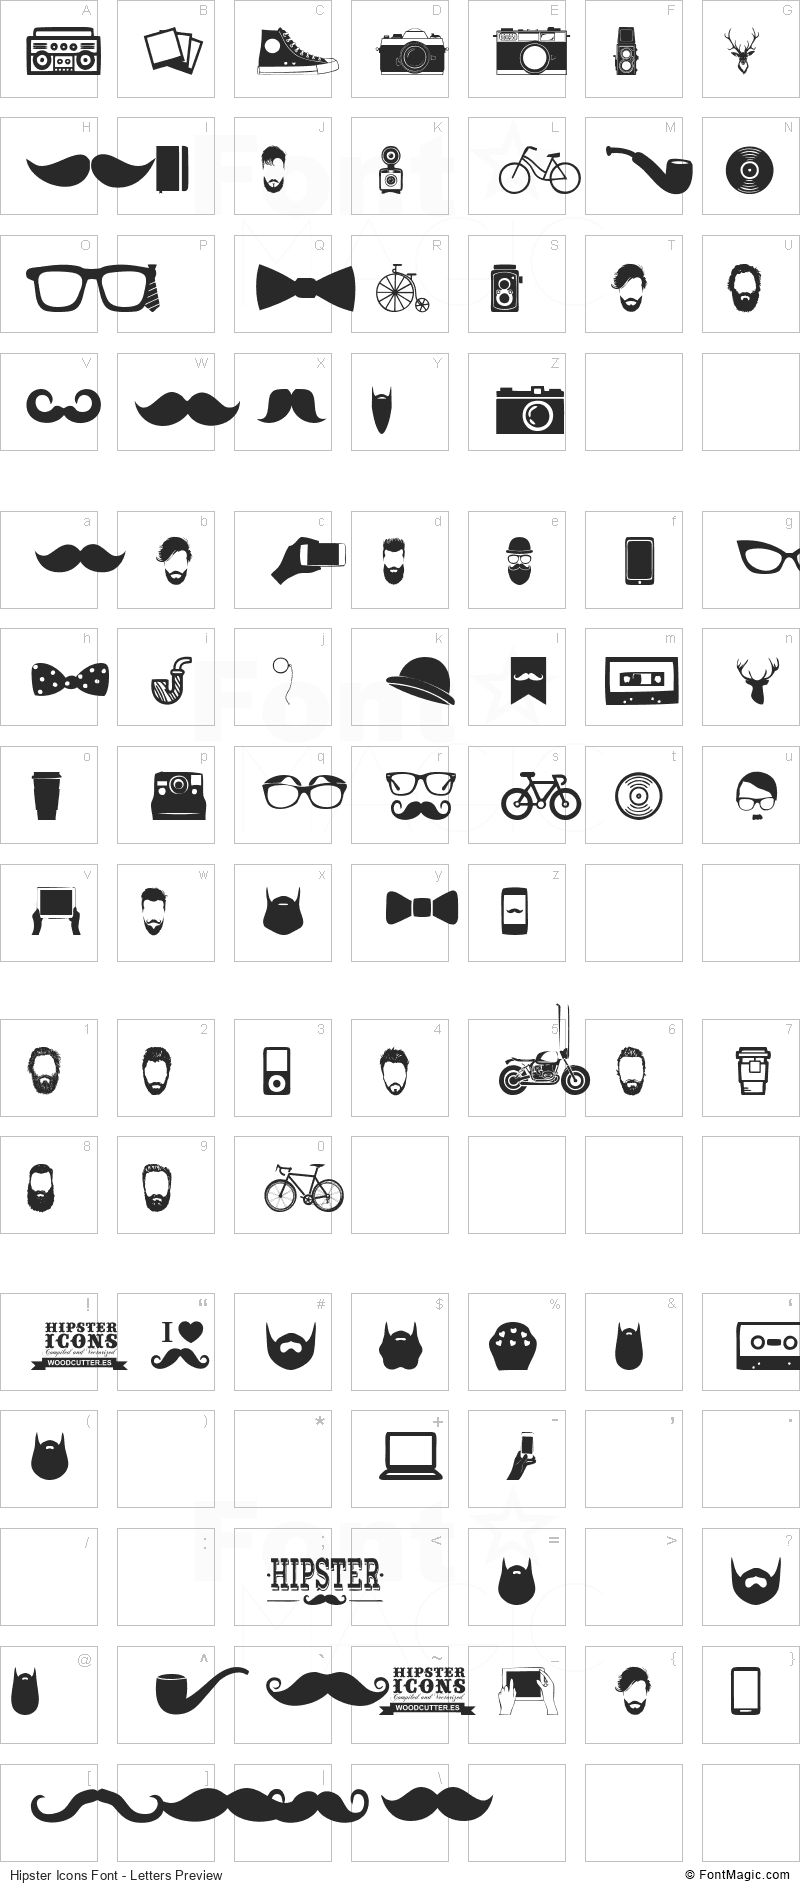 Hipster Icons Font - All Latters Preview Chart